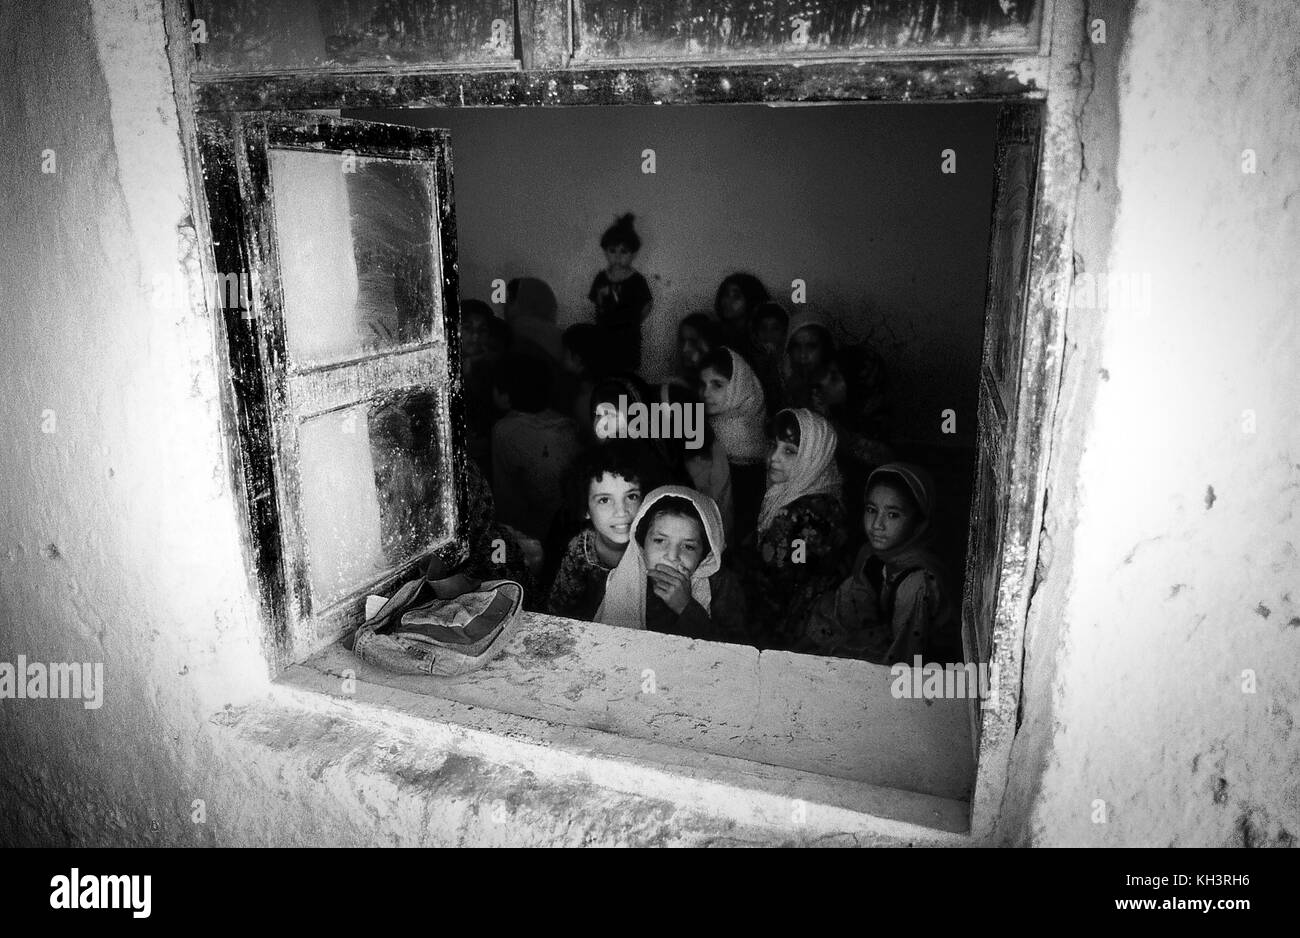 Girls look out of a window from a small school in a refugee camp in Peshawar, Pakistan. Date: 8/2000. Photographer: Xabier Mikel Laburu Stock Photo